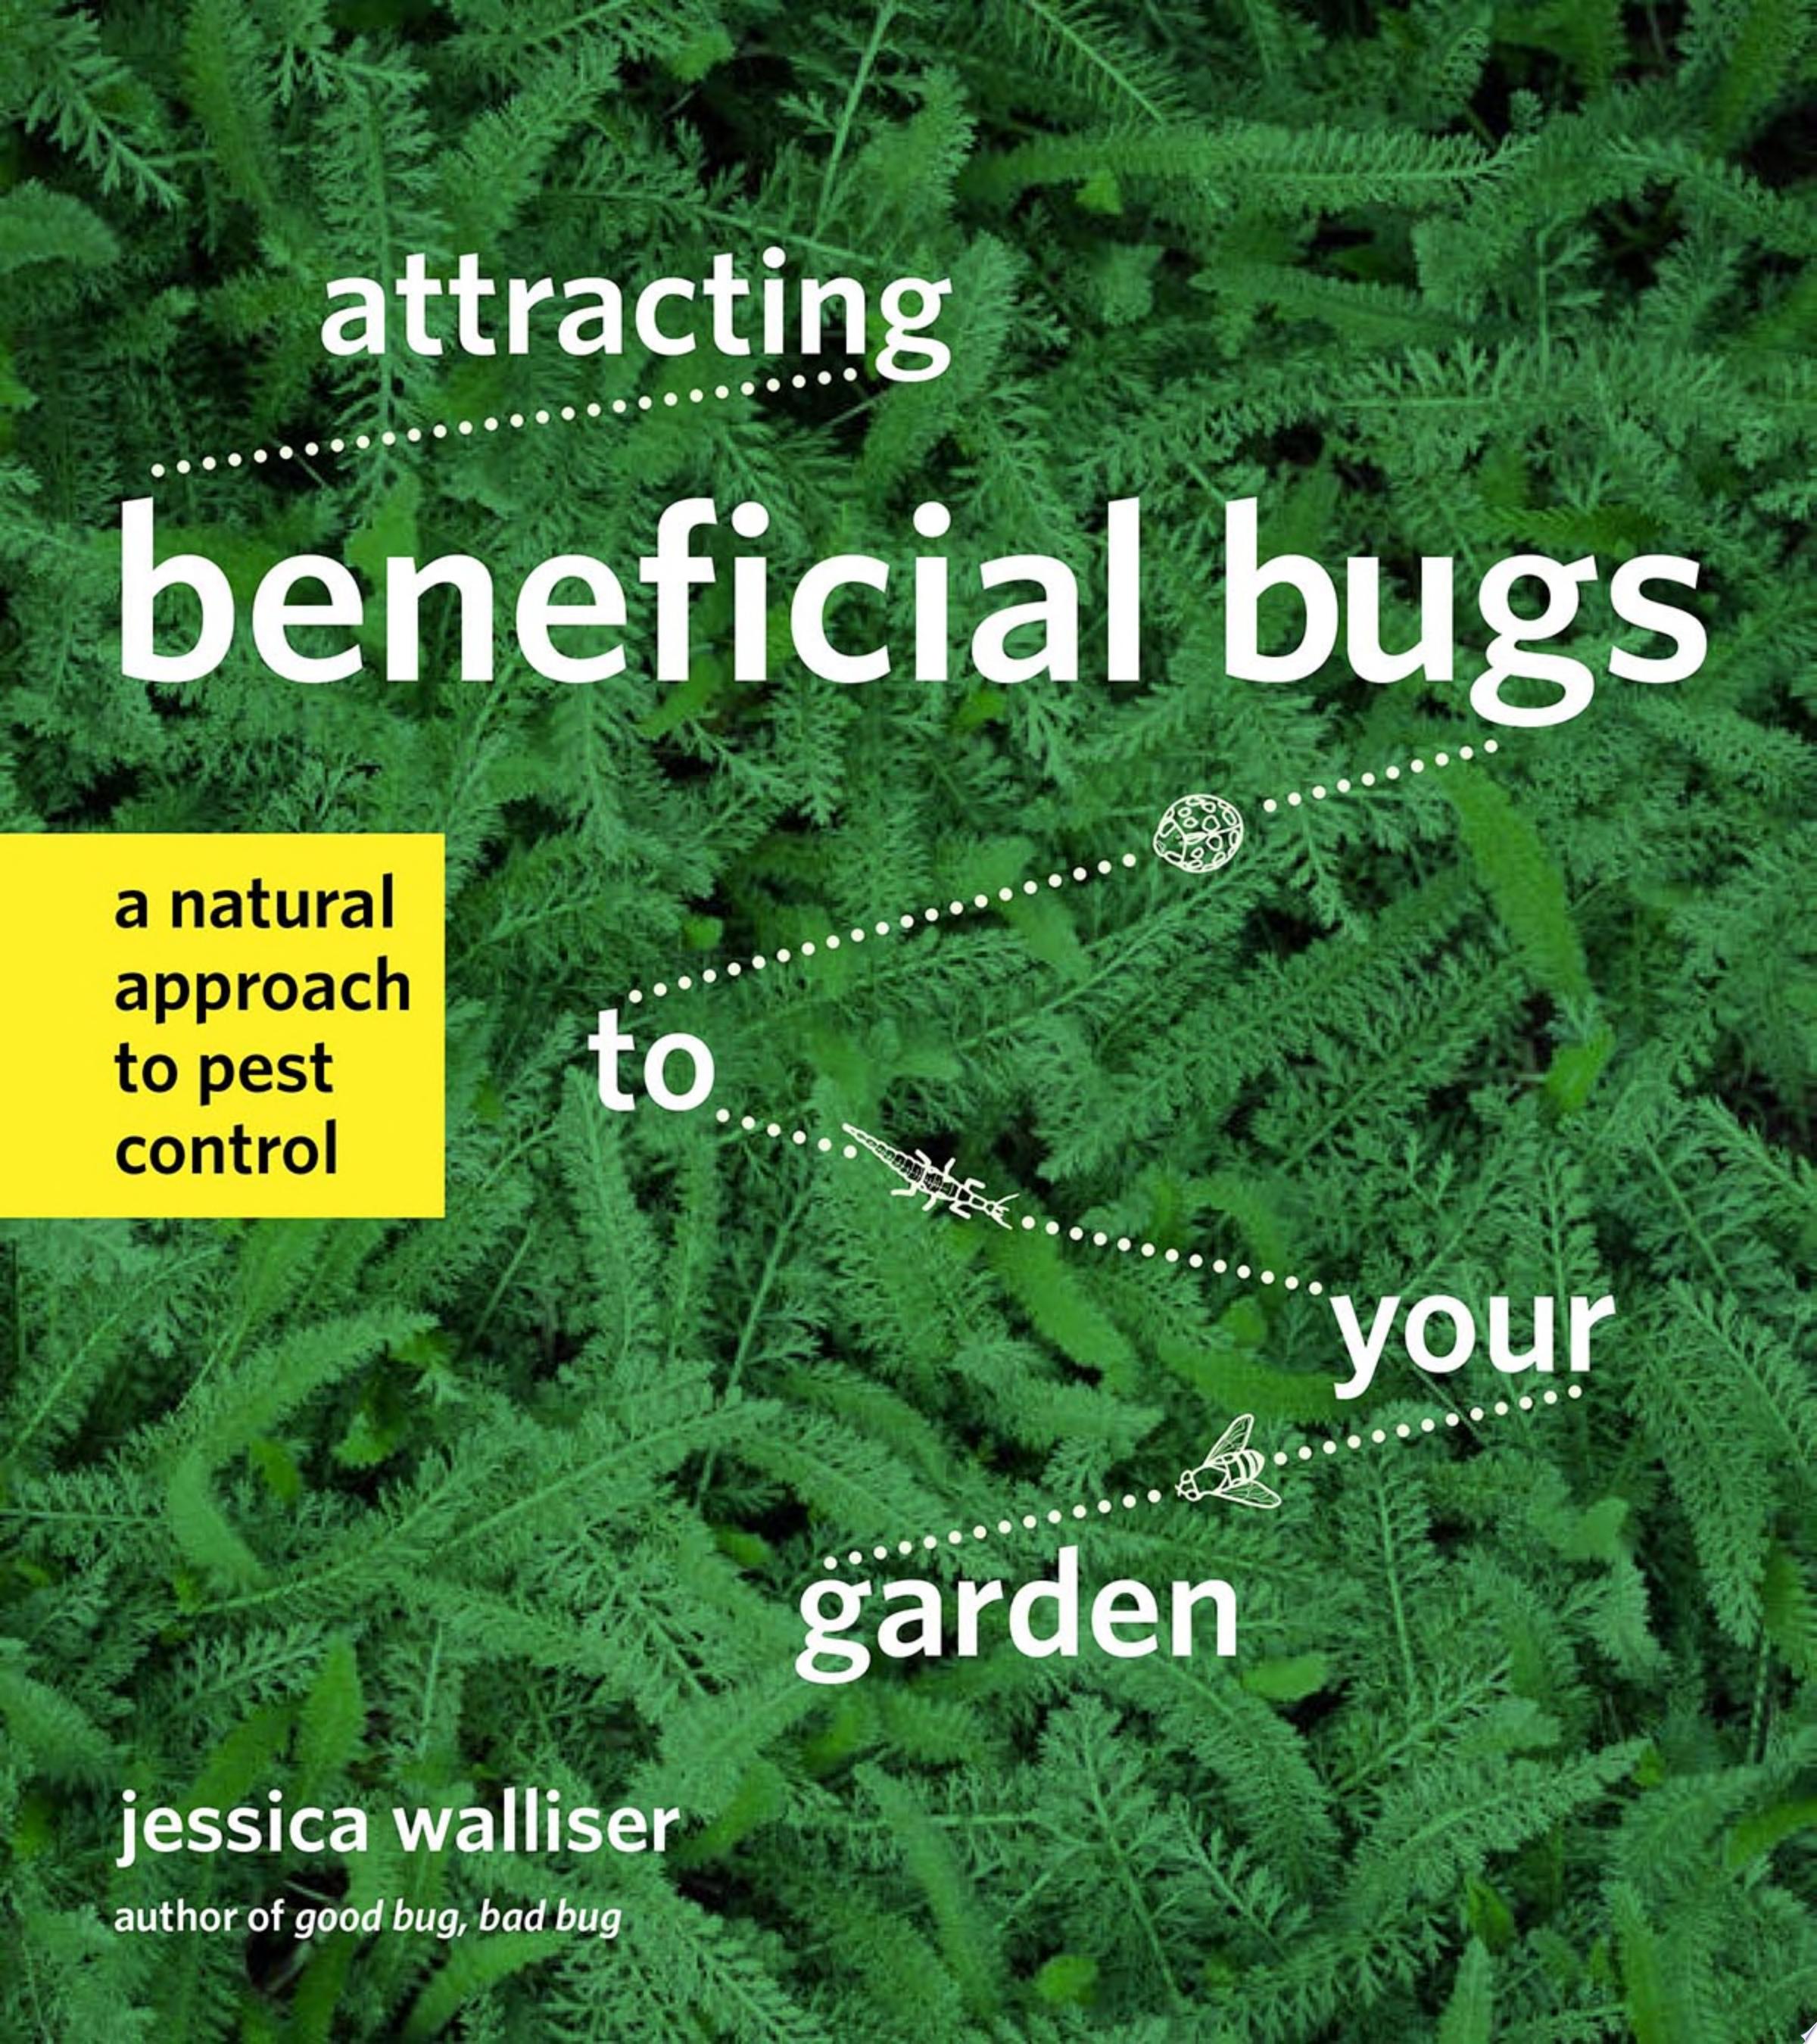 Image for "Attracting Beneficial Bugs to Your Garden"